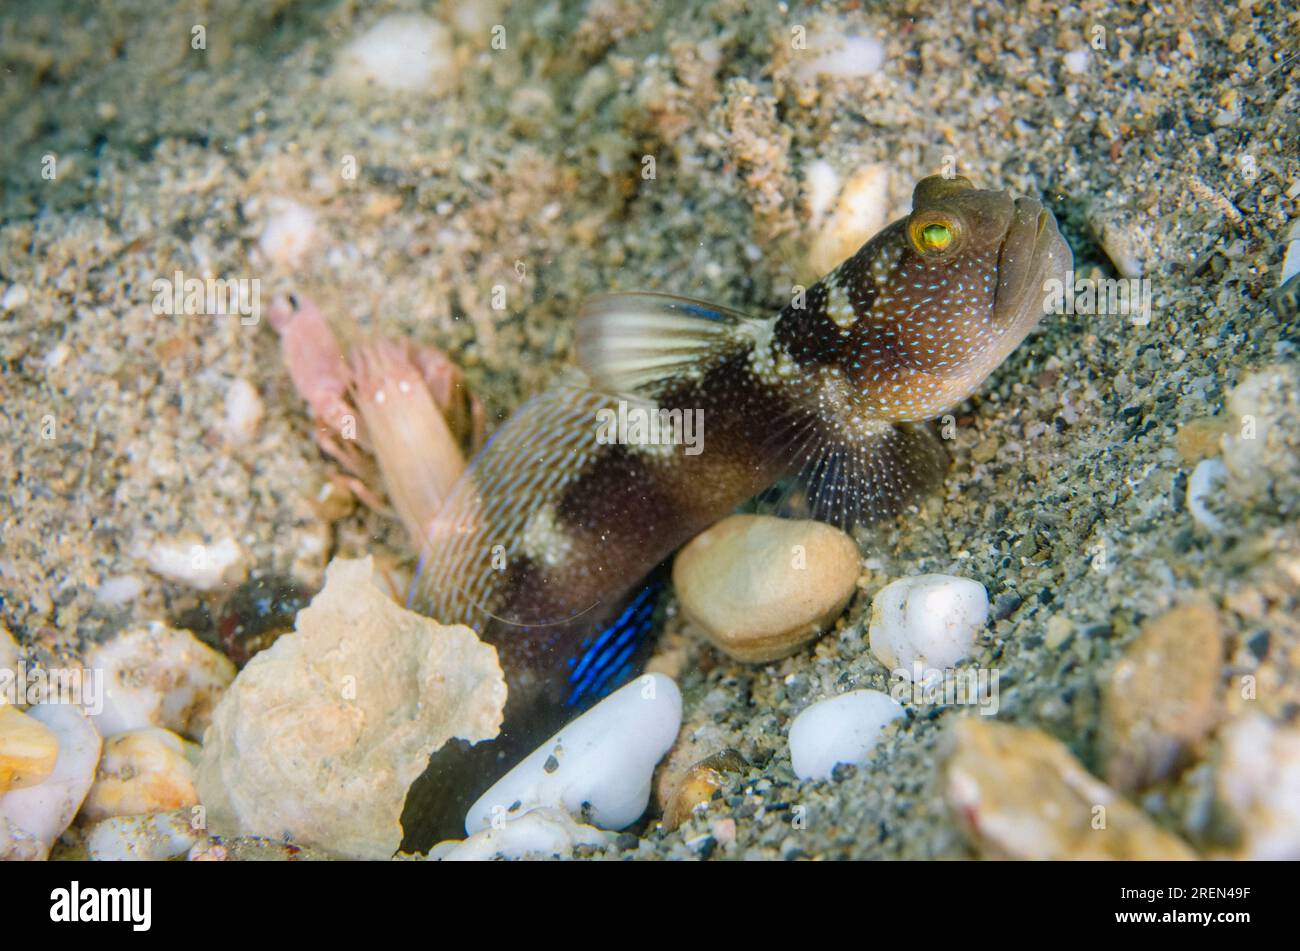 Variable Shrimpgoby, Cryptocentrus fasciatus, keeping watch whilke Snapping Shrimp, Alpheus sp, digs shared hole on sand, Dili Rock East dive site, Di Stock Photo